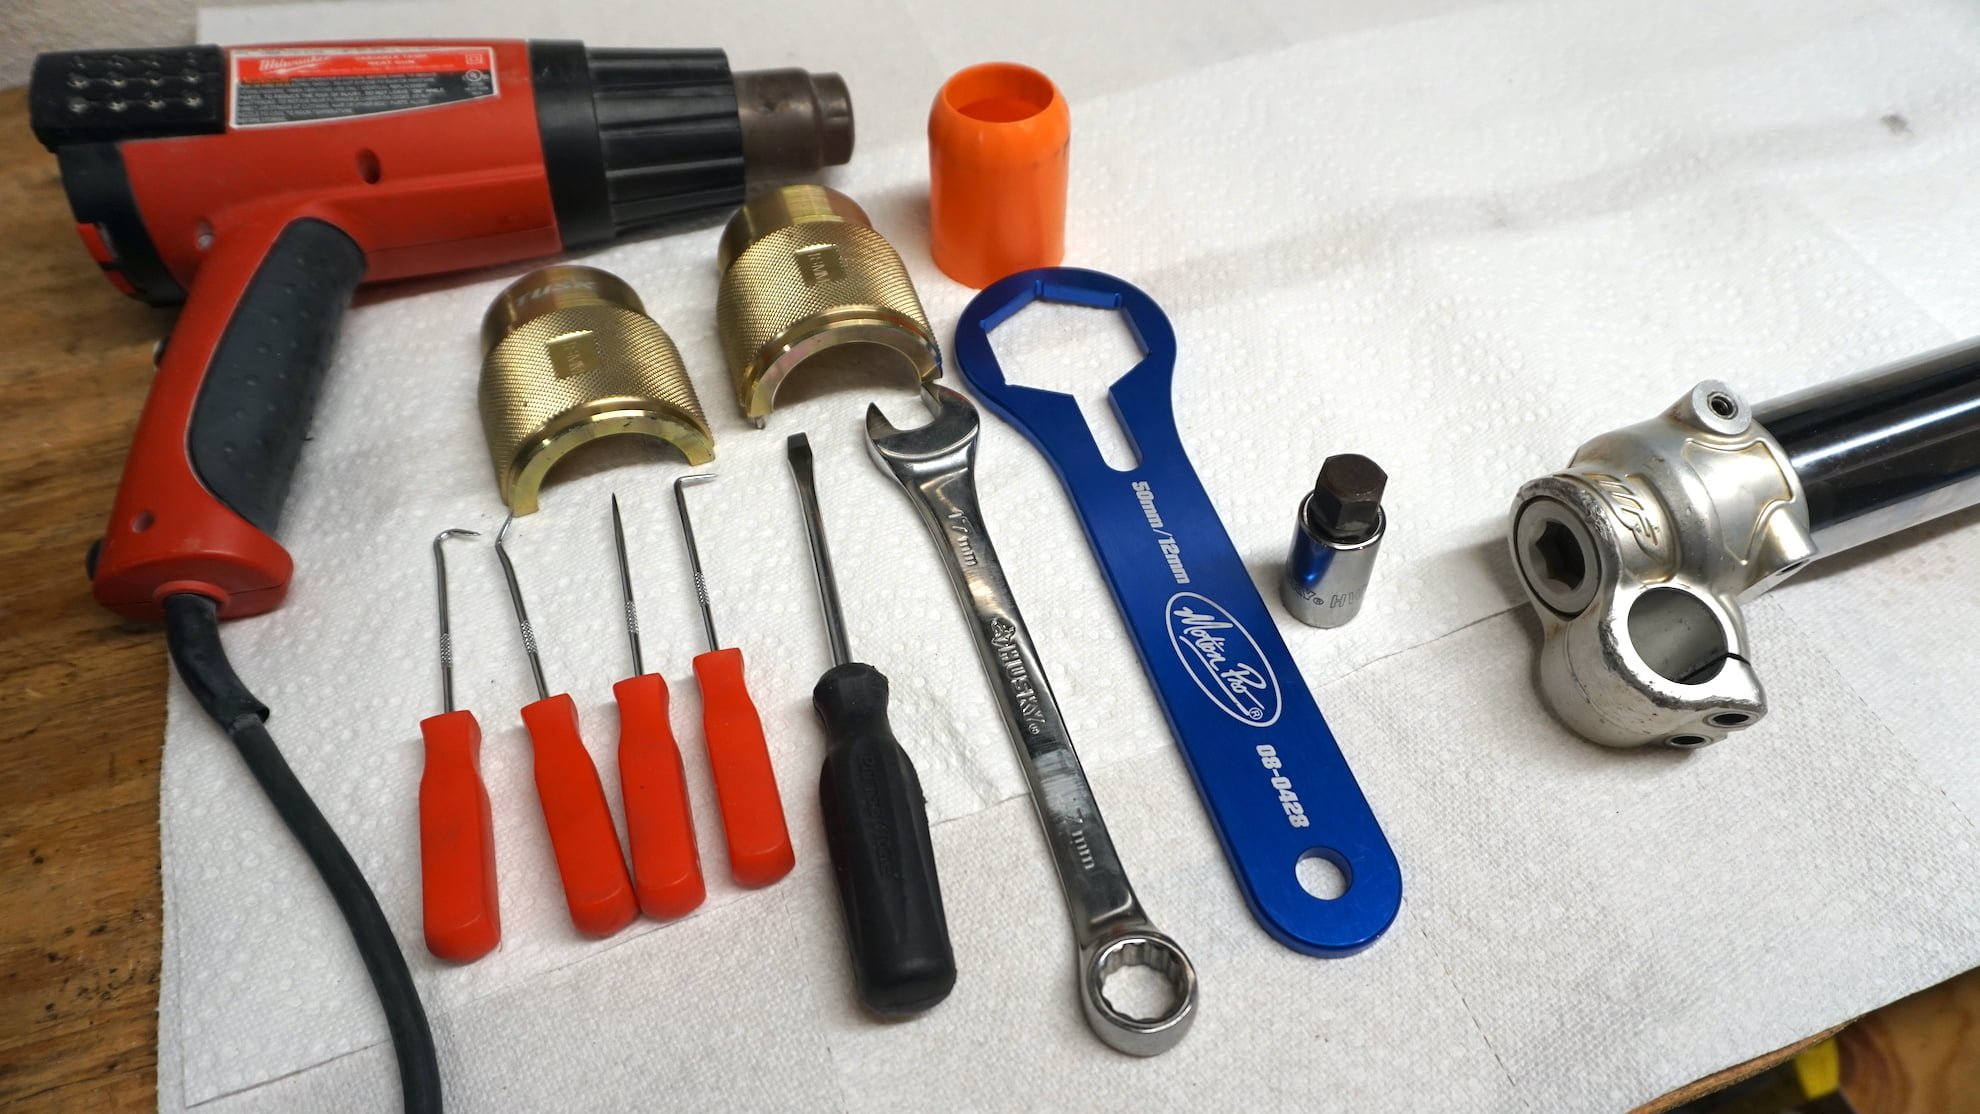 Recommended tools for rebuilding dirt bike forks laid on the table